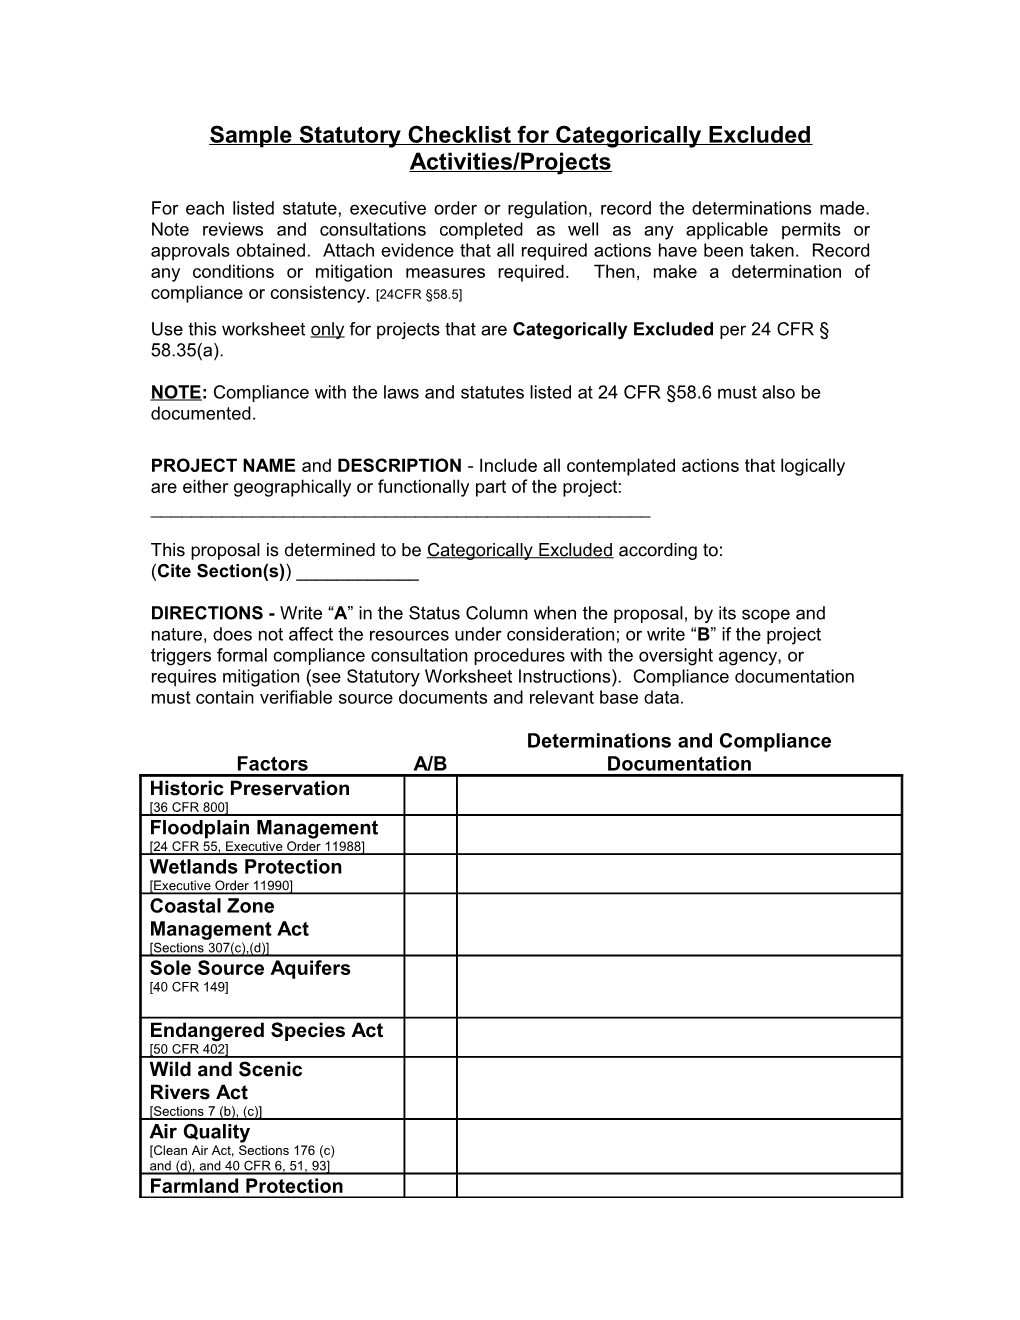 Sample Statutory Checklist for Categorically Excluded Activities/Projects